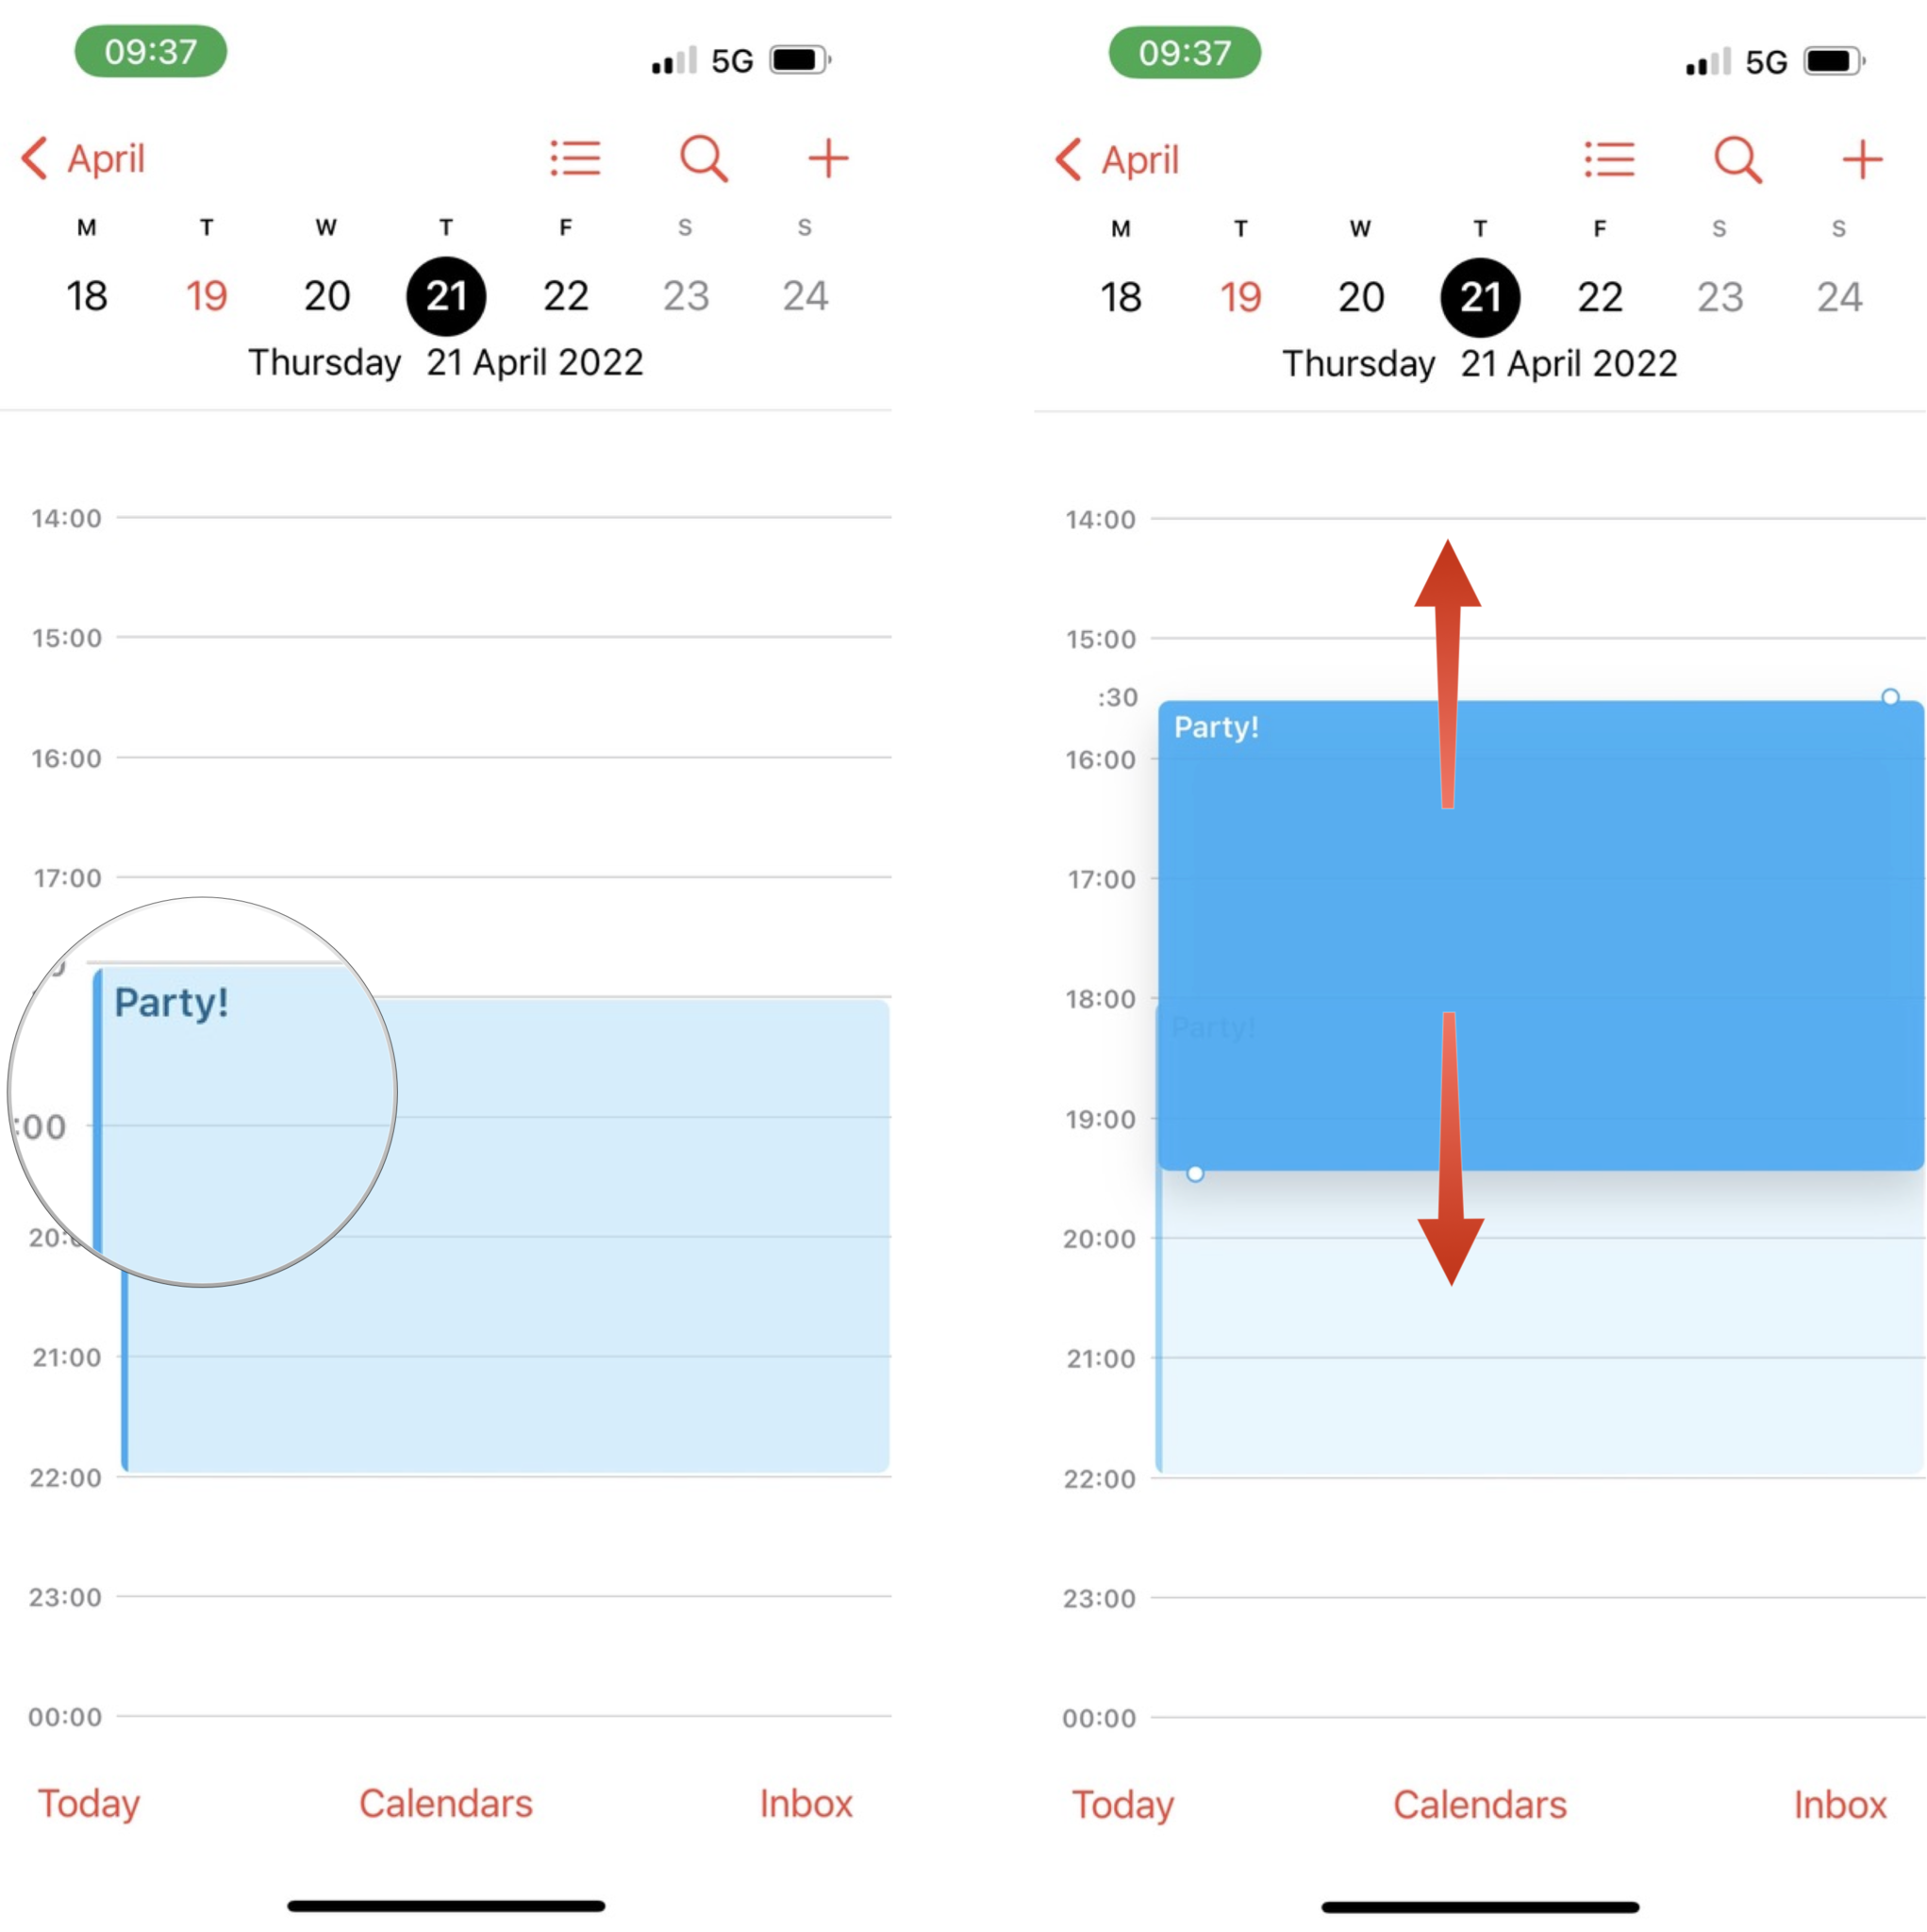 How to move a calendar event or appointment with drag and drop: Tap and hold the calender event, move it up and down, release it at the correct time